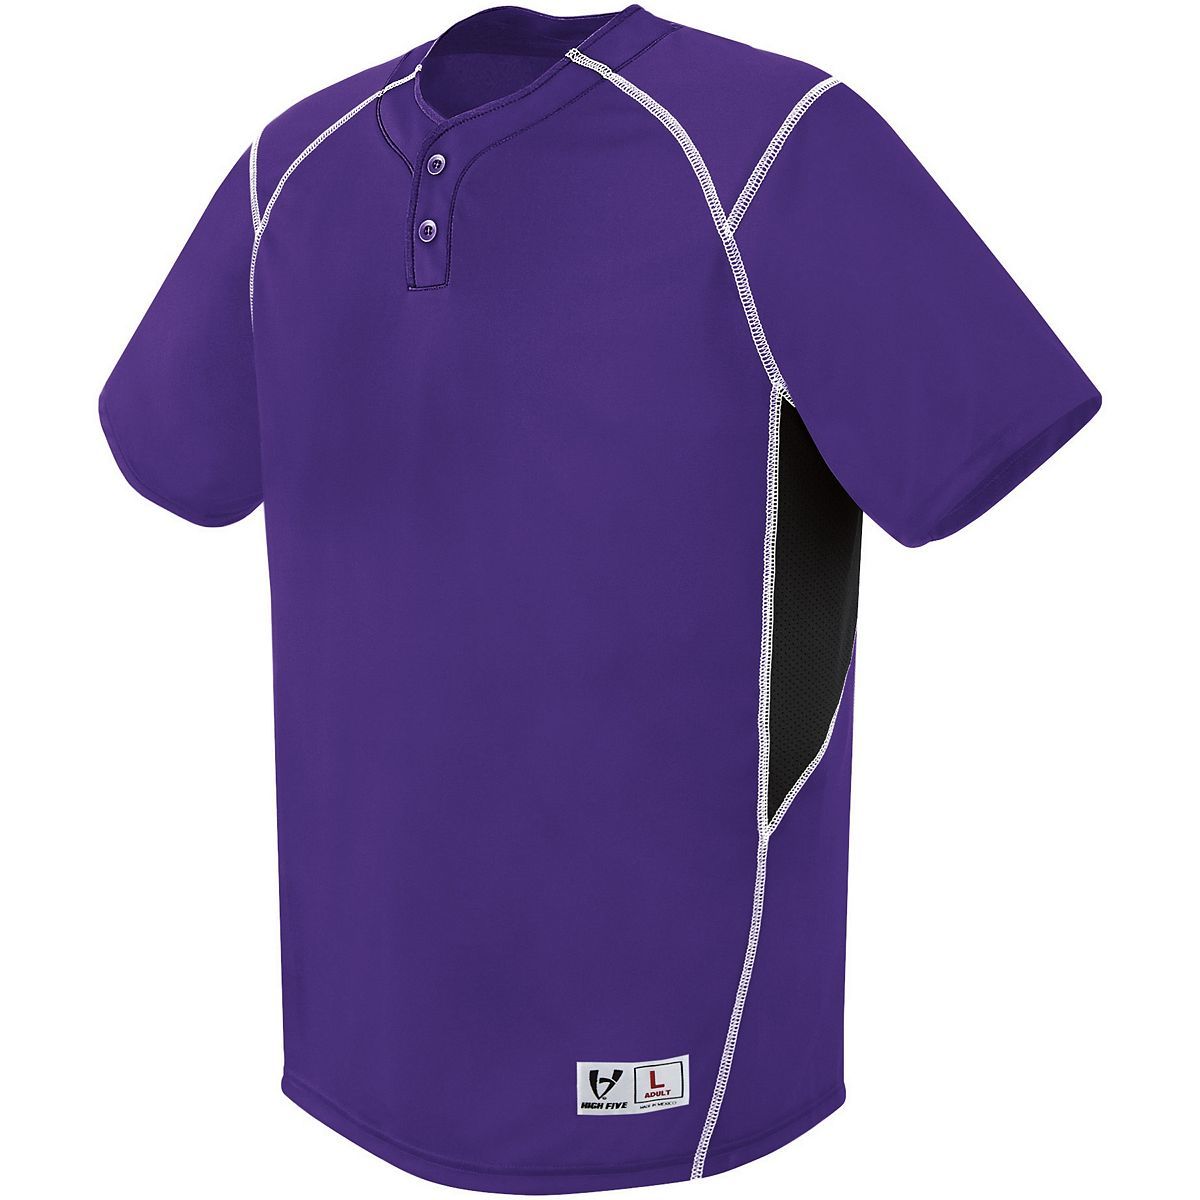 Augusta Sportswear Bandit Two-Button Jersey in Purple/Black/White  -Part of the Adult, Adult-Jersey, Augusta-Products, Baseball, Shirts, All-Sports, All-Sports-1 product lines at KanaleyCreations.com